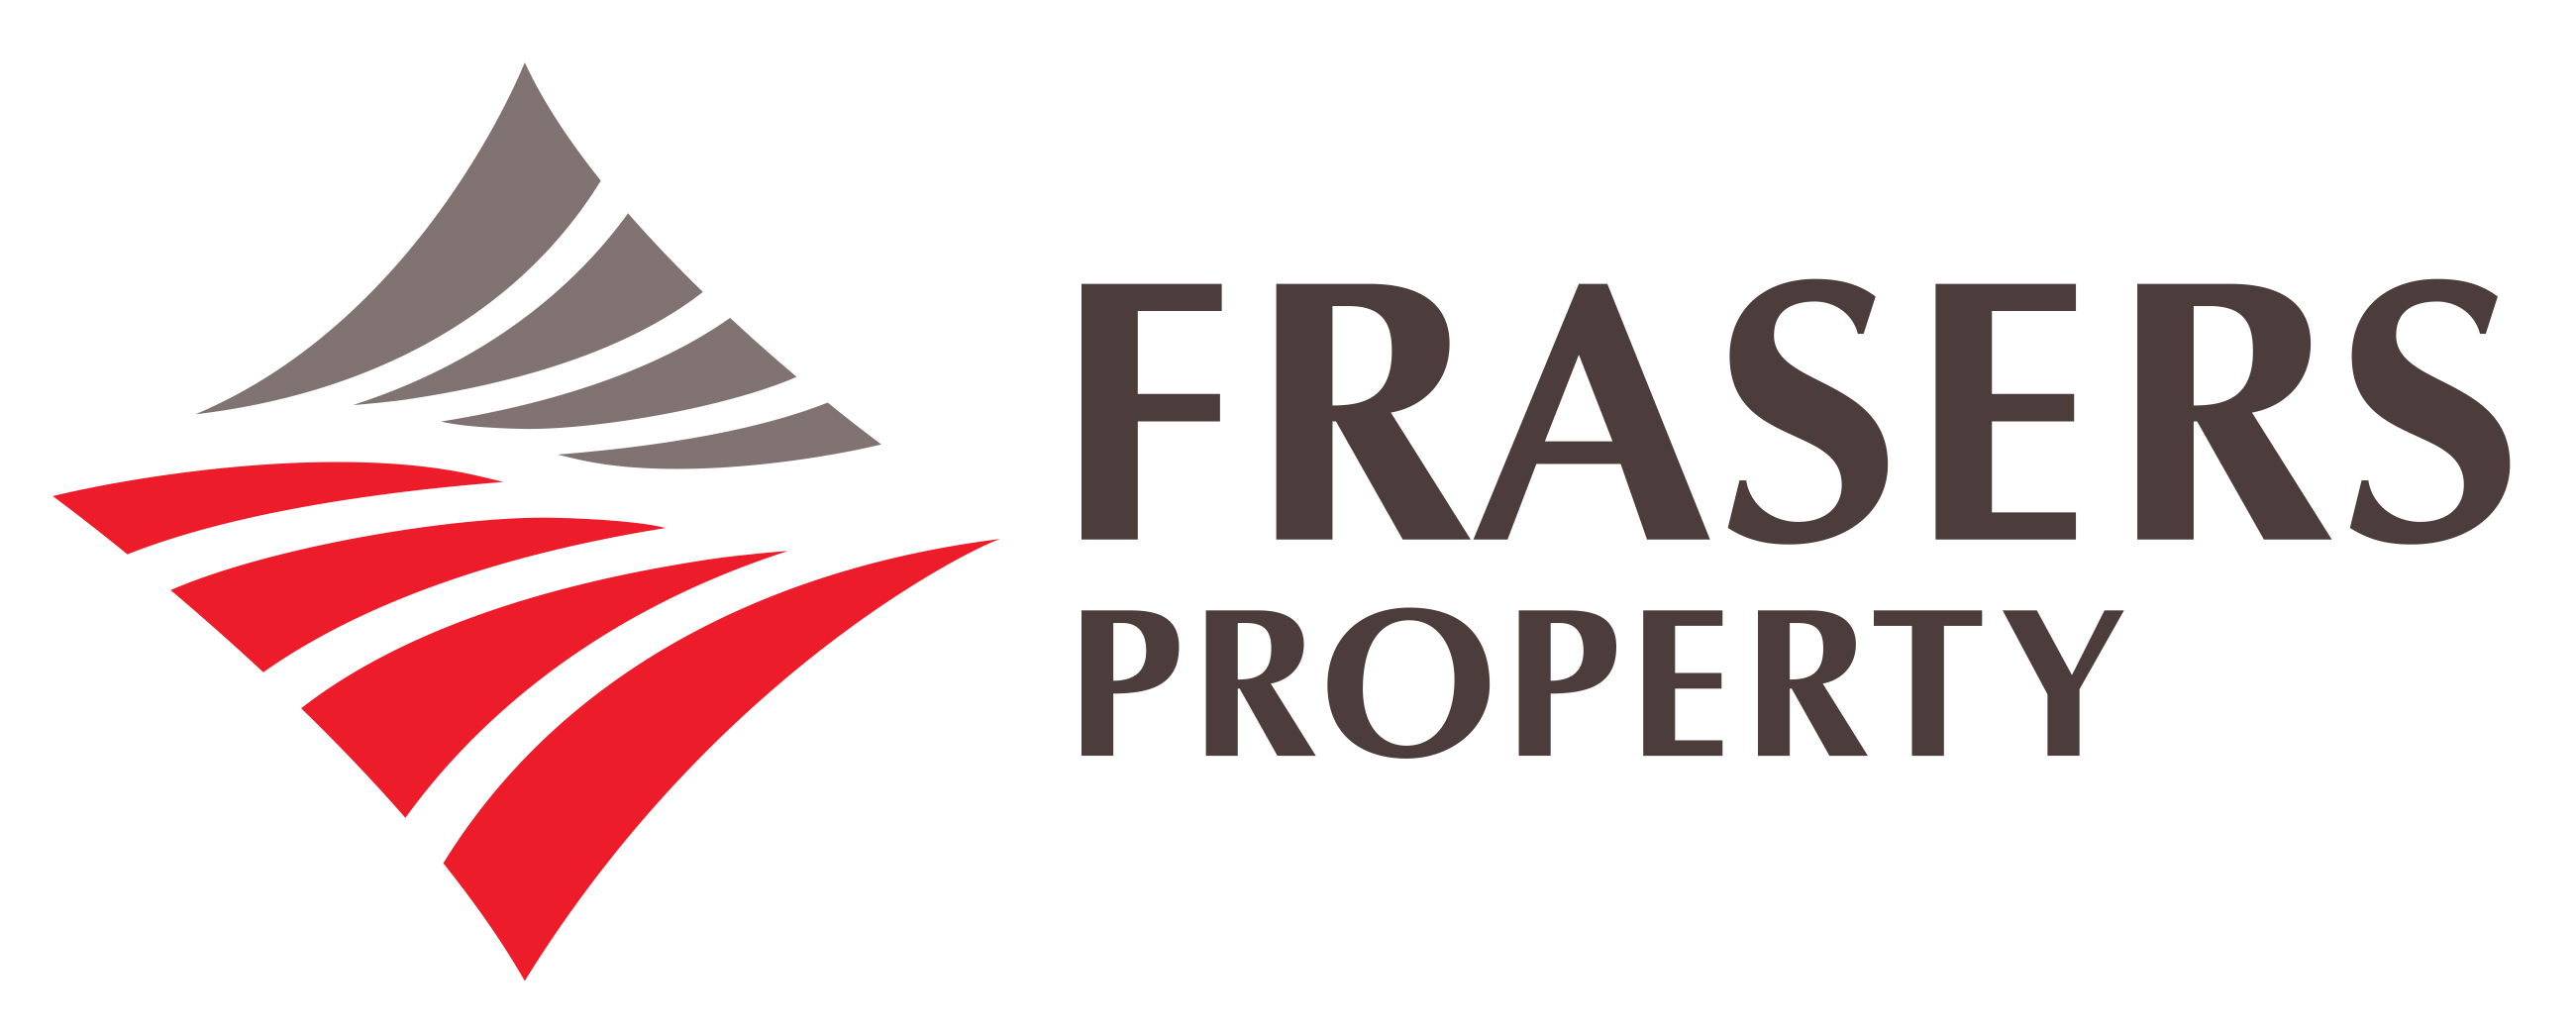 Real Estate Agency Frasers Property Australia - RHODES